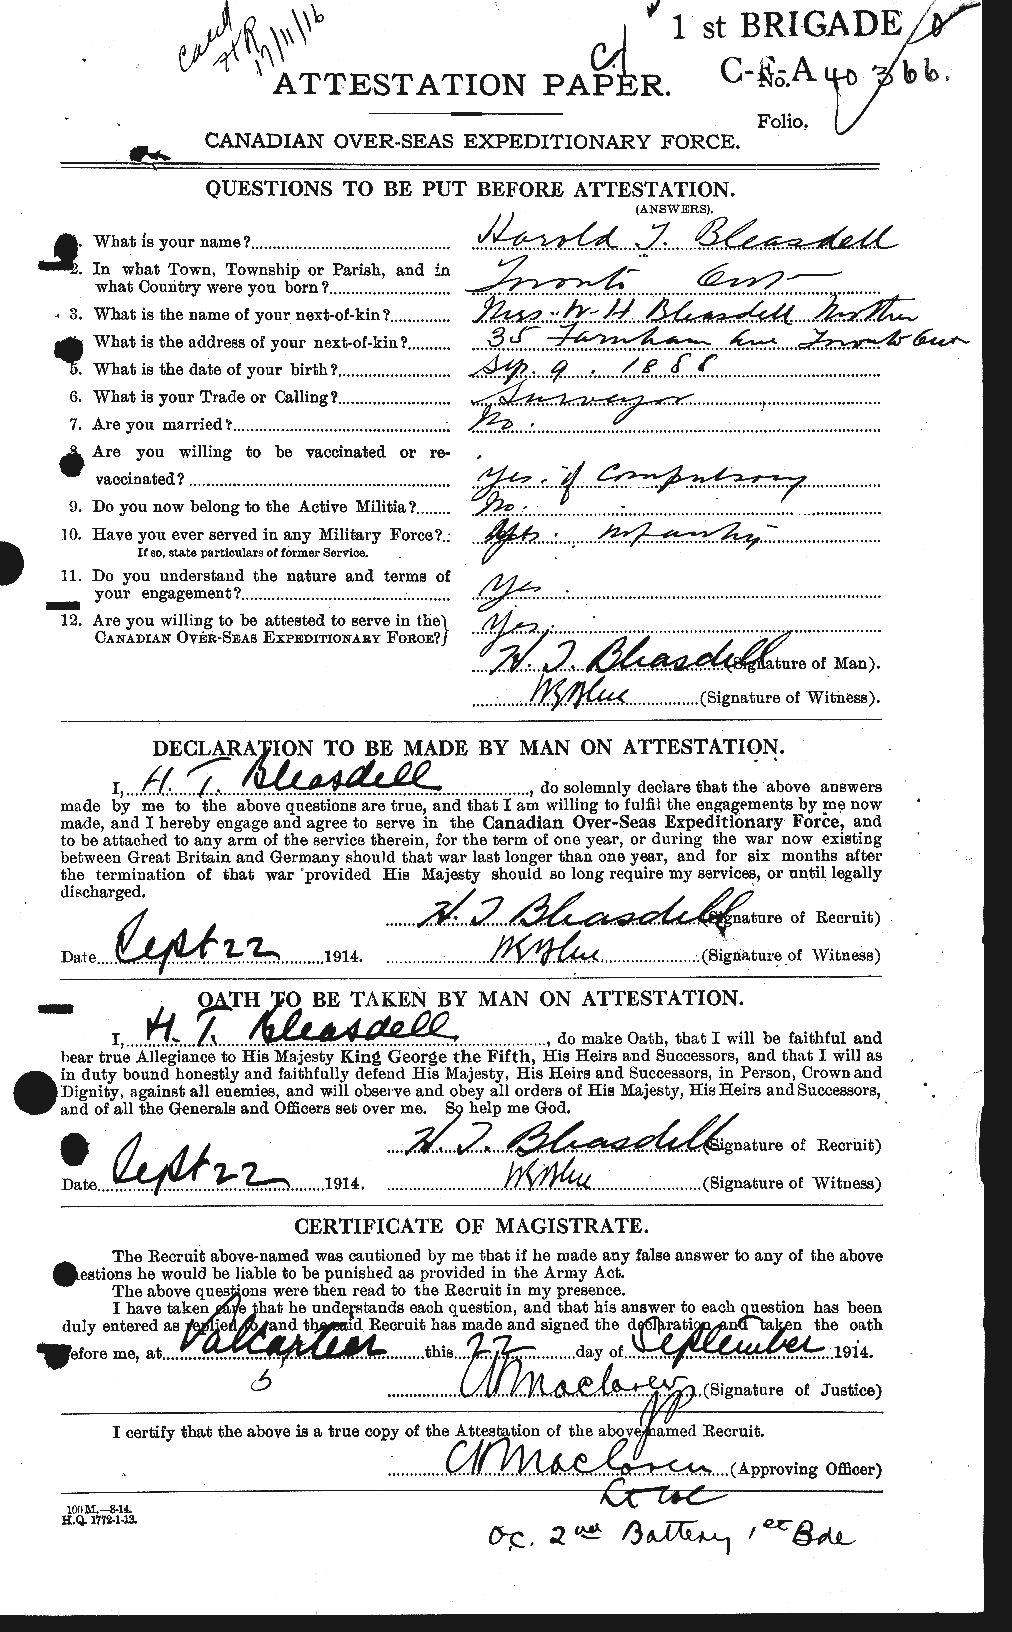 Personnel Records of the First World War - CEF 247919a